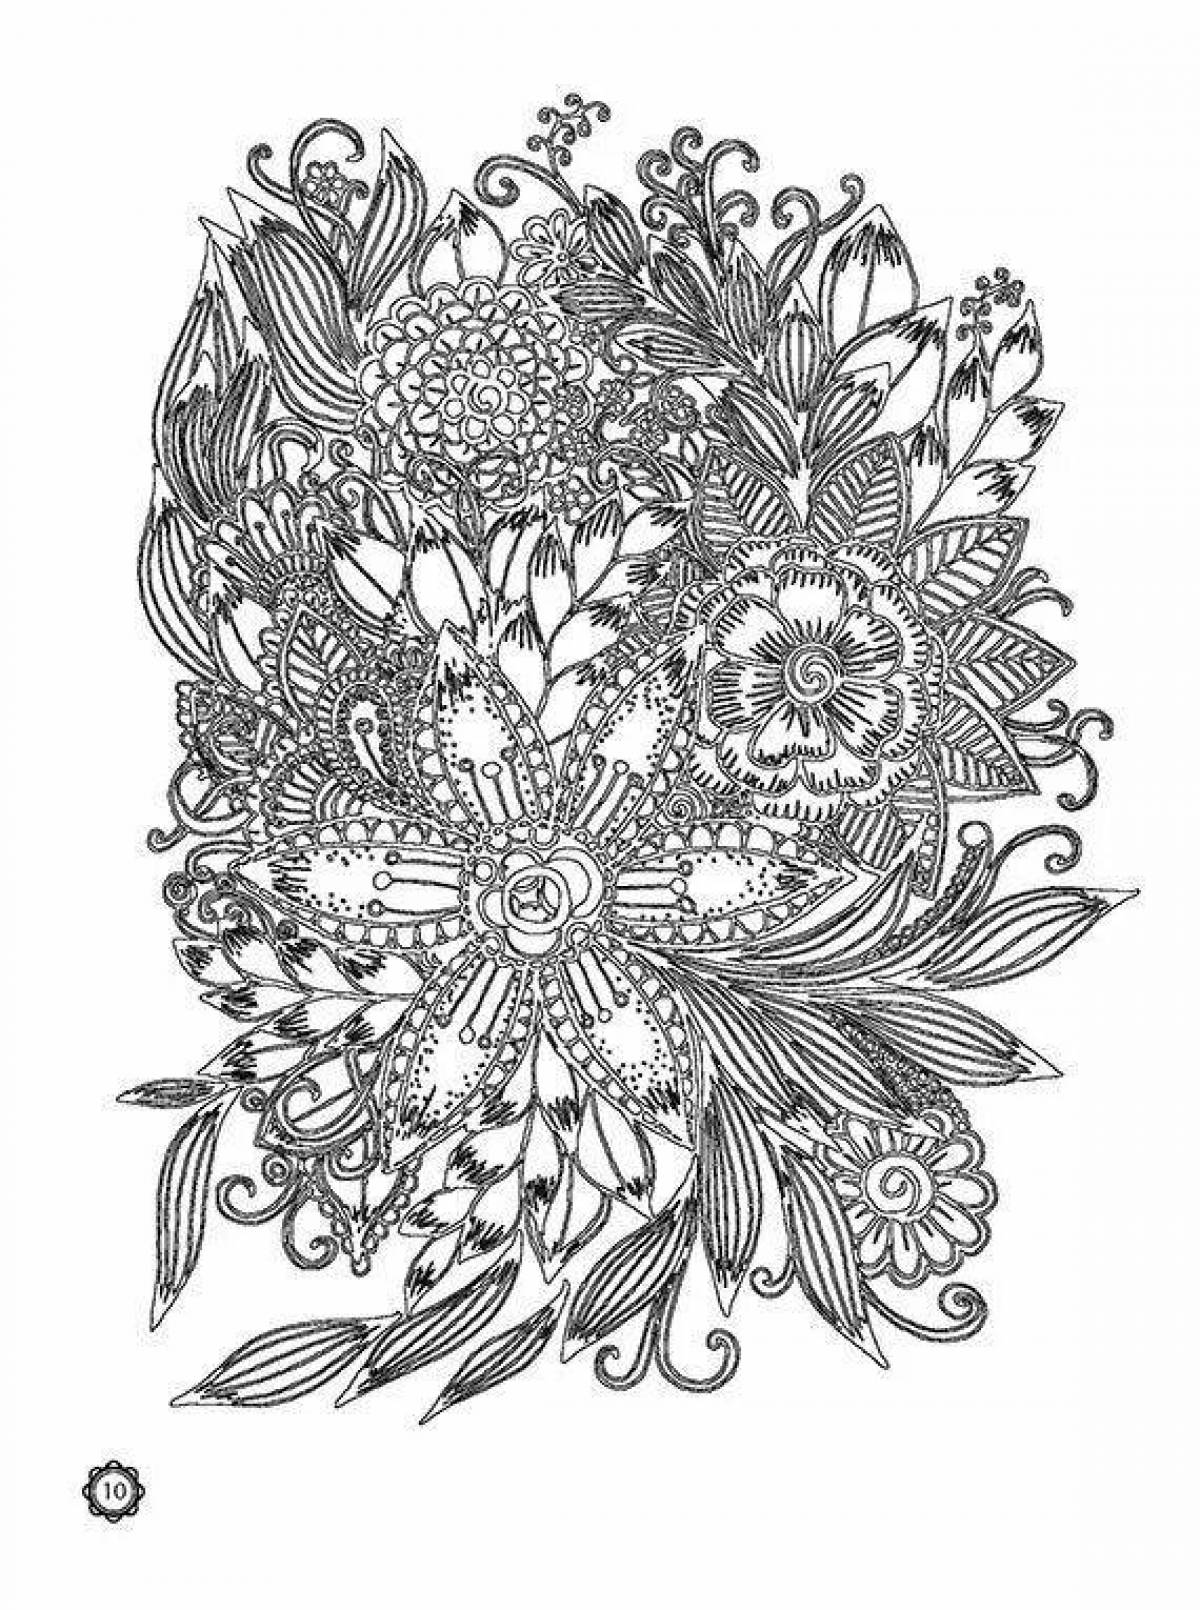 Colorful intricate flower coloring book